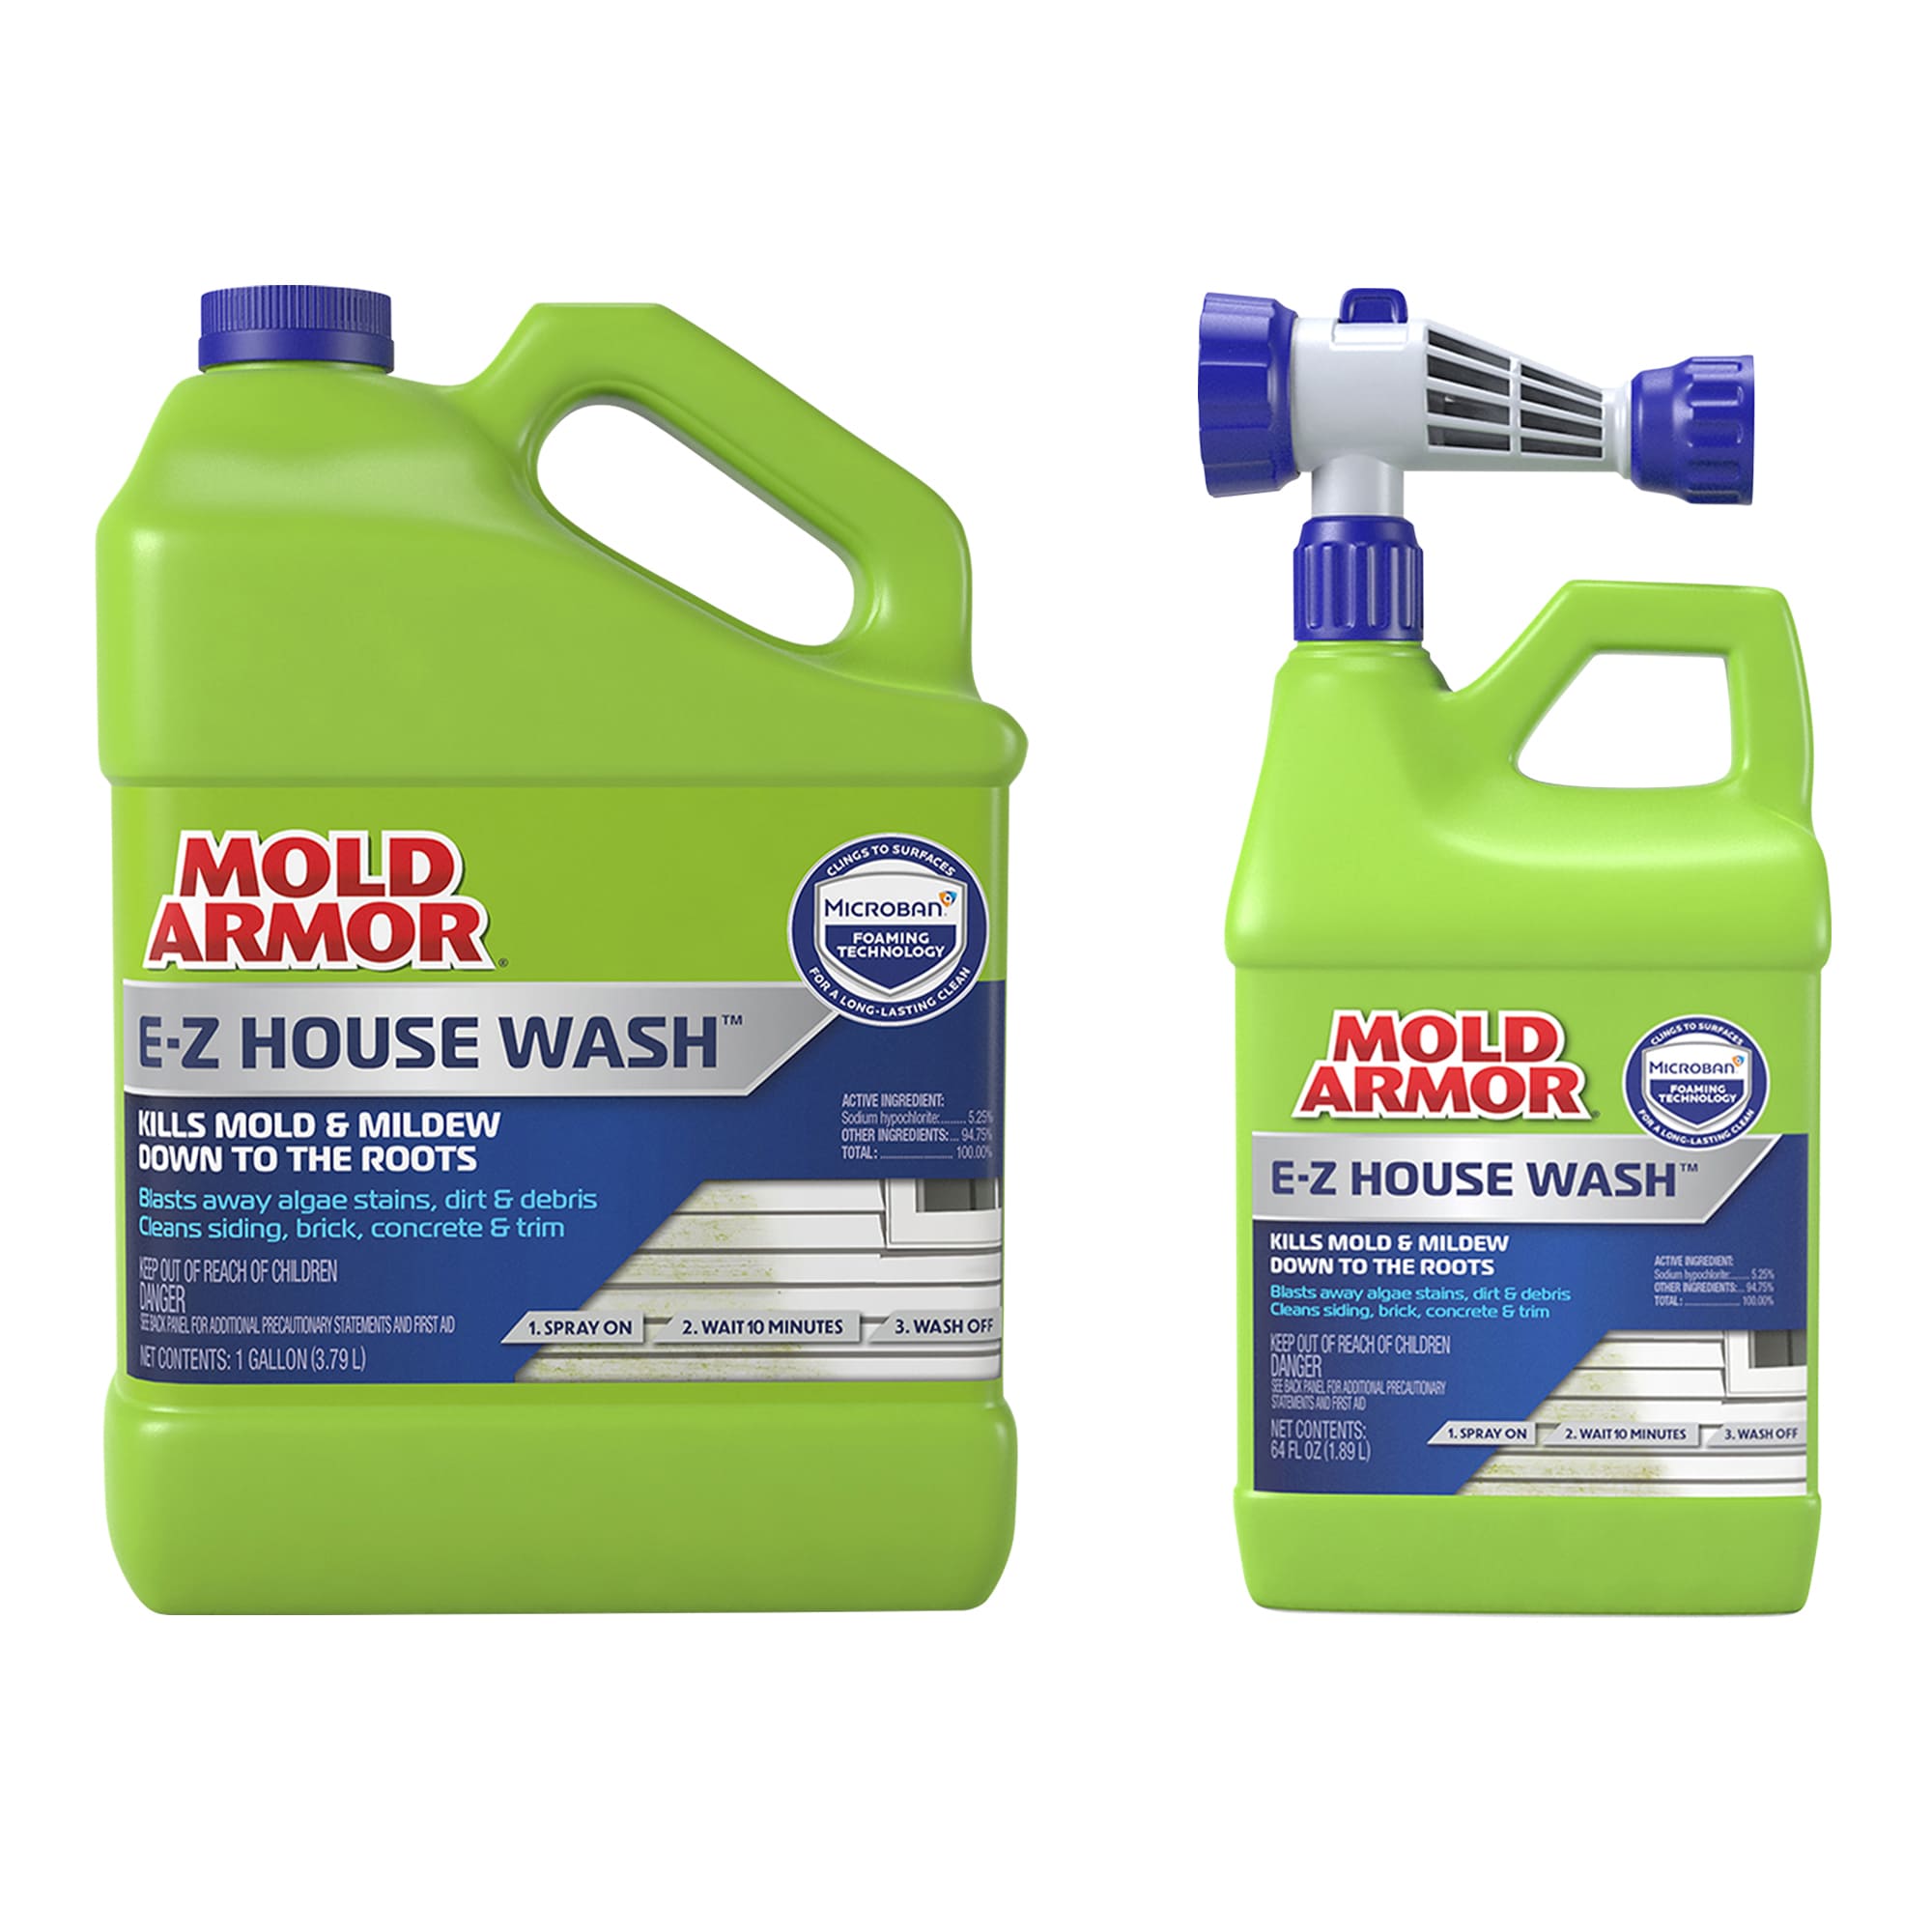 New Releases: The best-selling new & future releases in Windshield  Washer Fluids